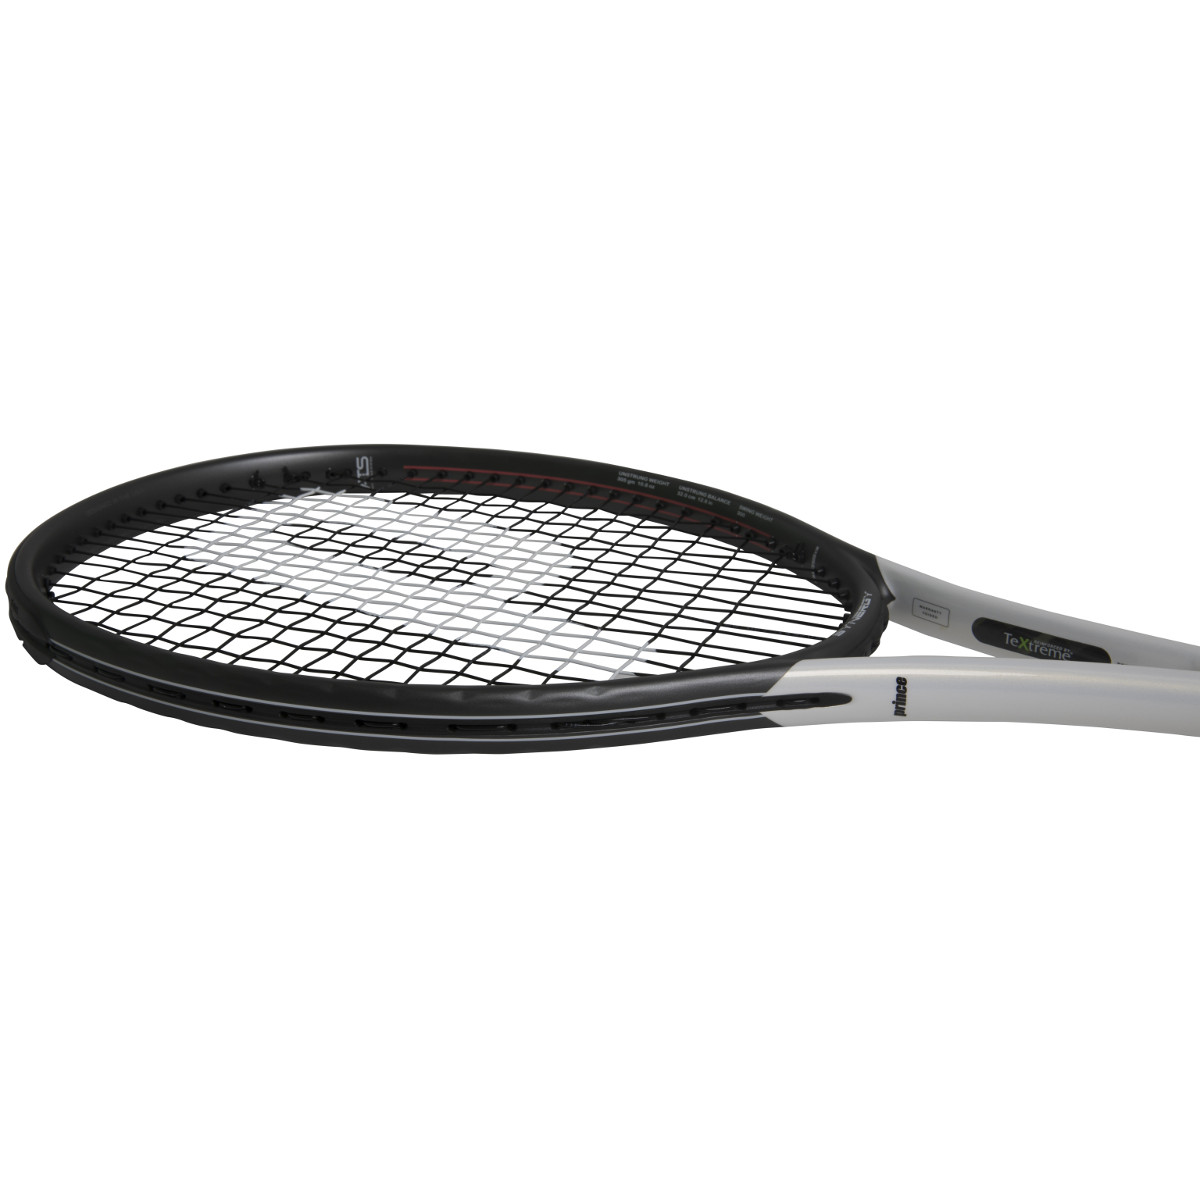 PRINCE SYNERGY 98 RACQUET (305 GR) - PRINCE - Adult Racquets